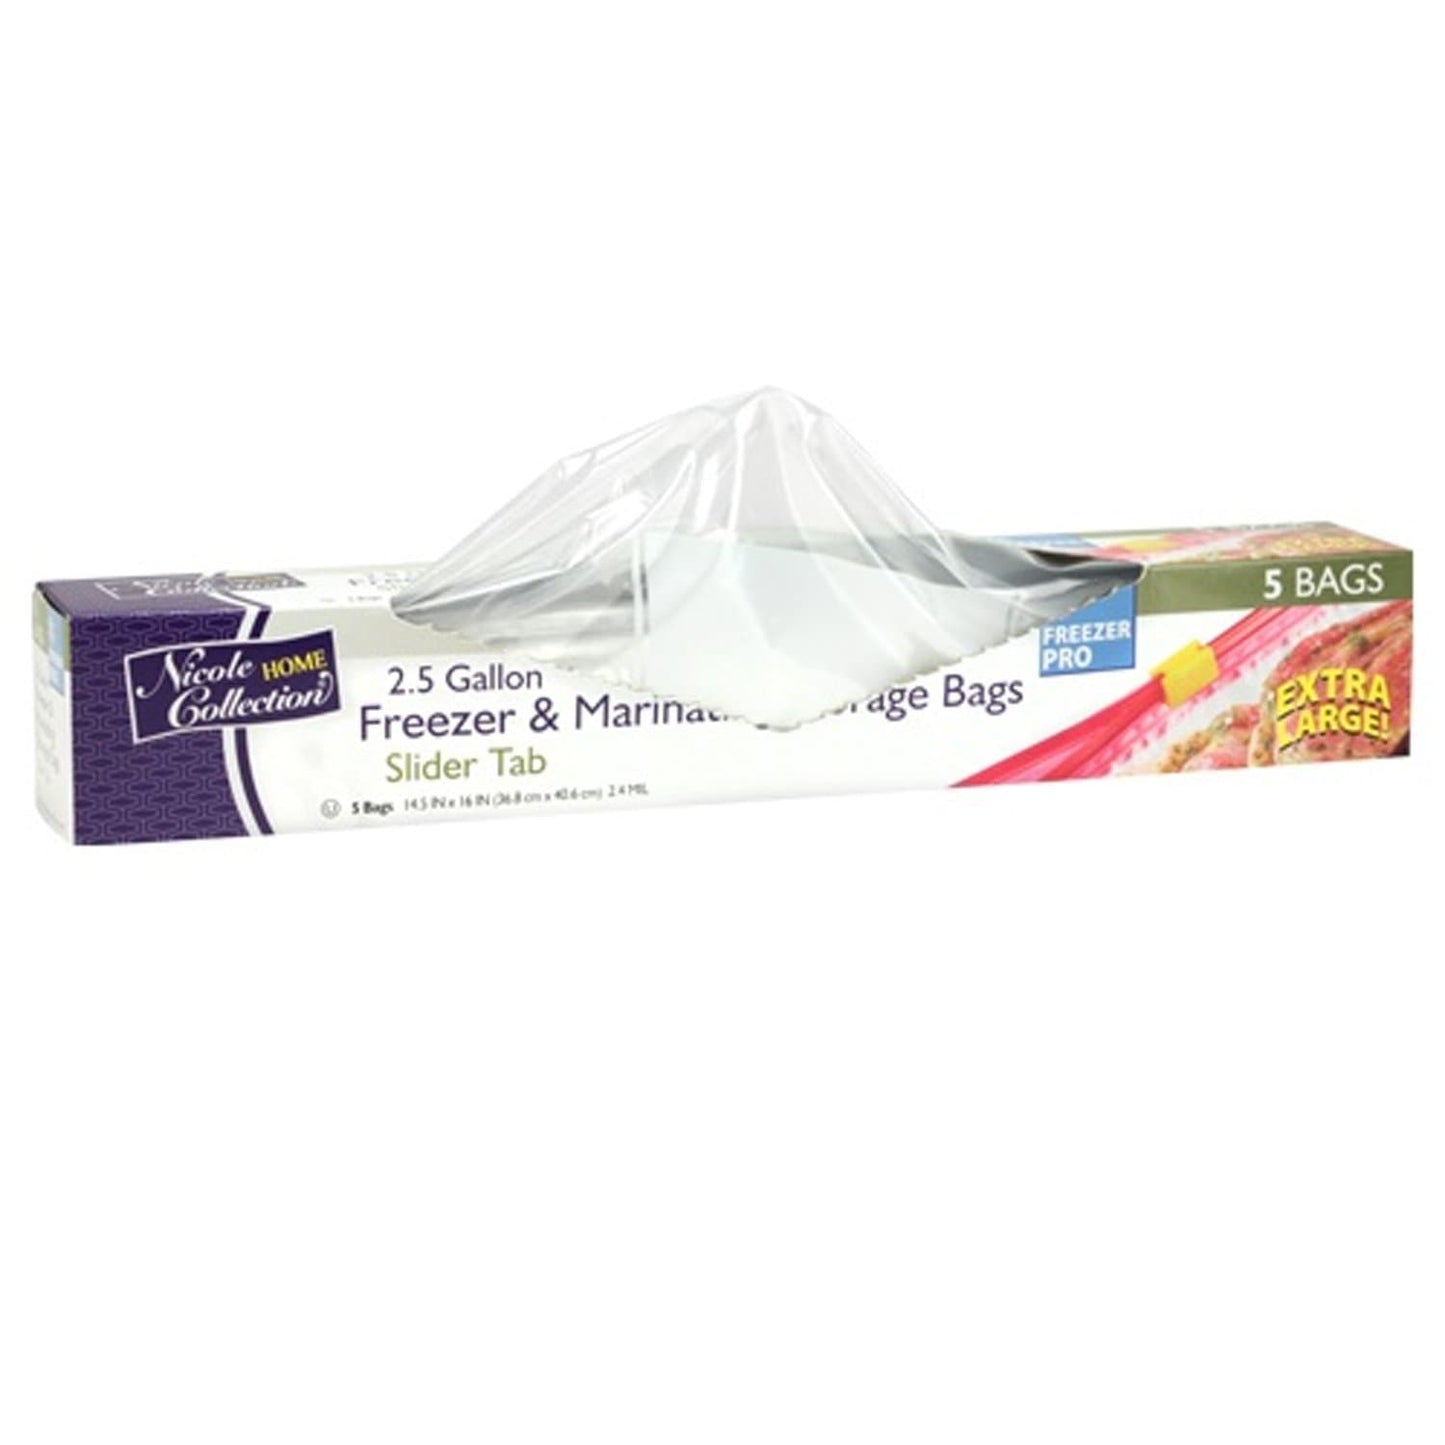 https://onlyonestopshop.com/cdn/shop/products/Nicole-Home-Collection-Freezer-Storage-Bags-with-Slide-2.5-gal-Nicole-Collection-1603927259.jpg?v=1603927261&width=1445